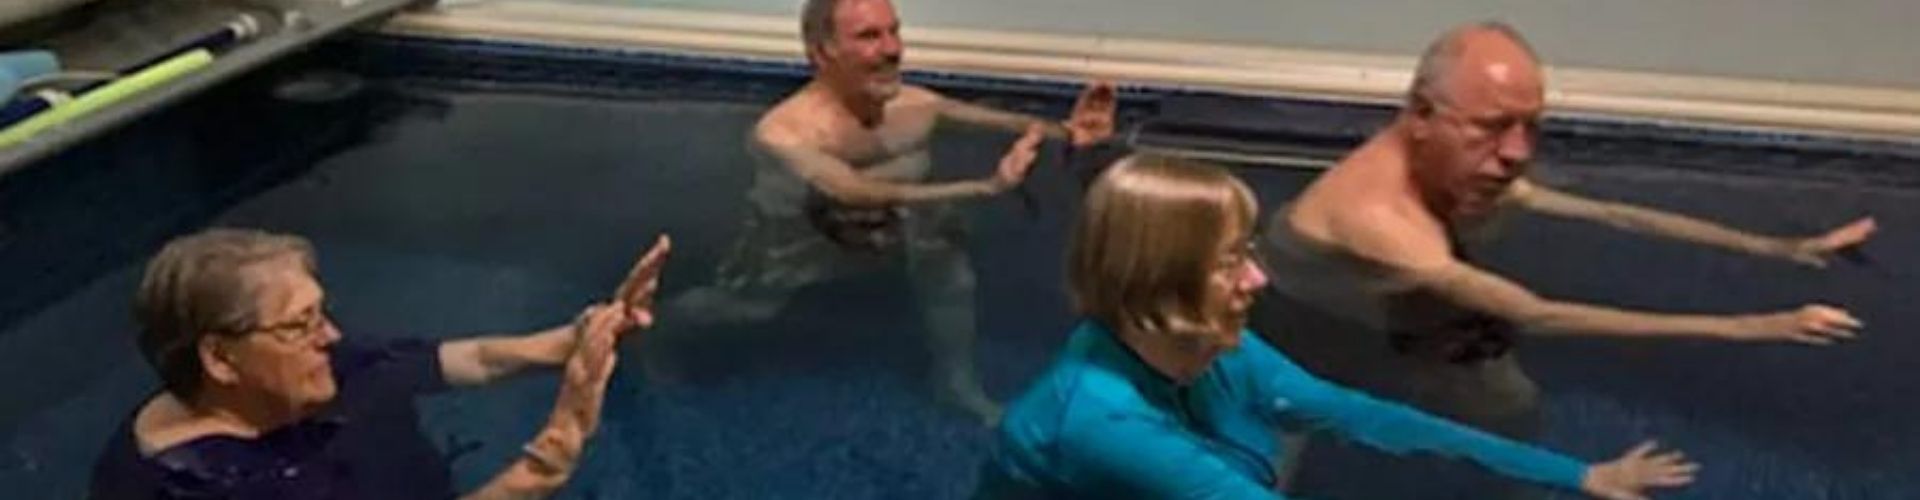 Arthritis Therapy Pools (and the People who Love Them)